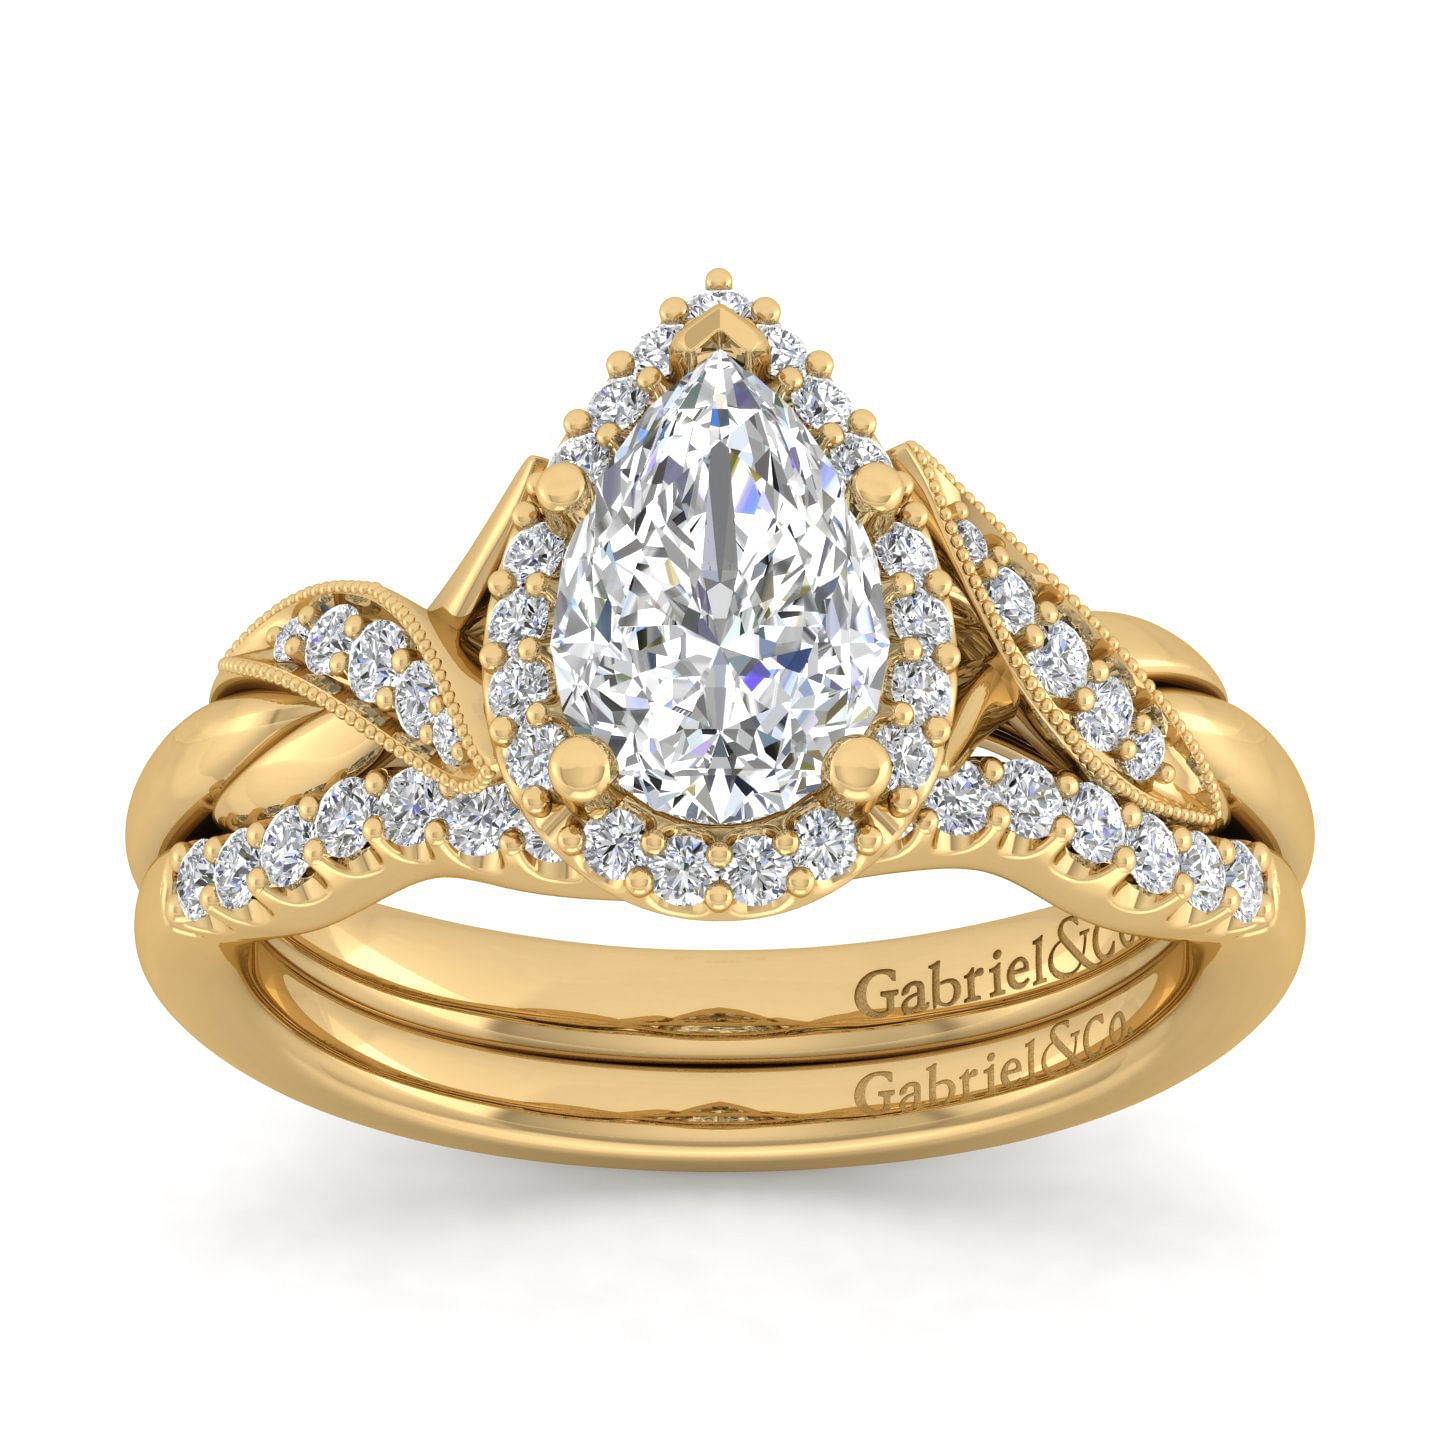 Vintage Inspired 14K Yellow Gold Pear Shape Halo Diamond Engagement Ring